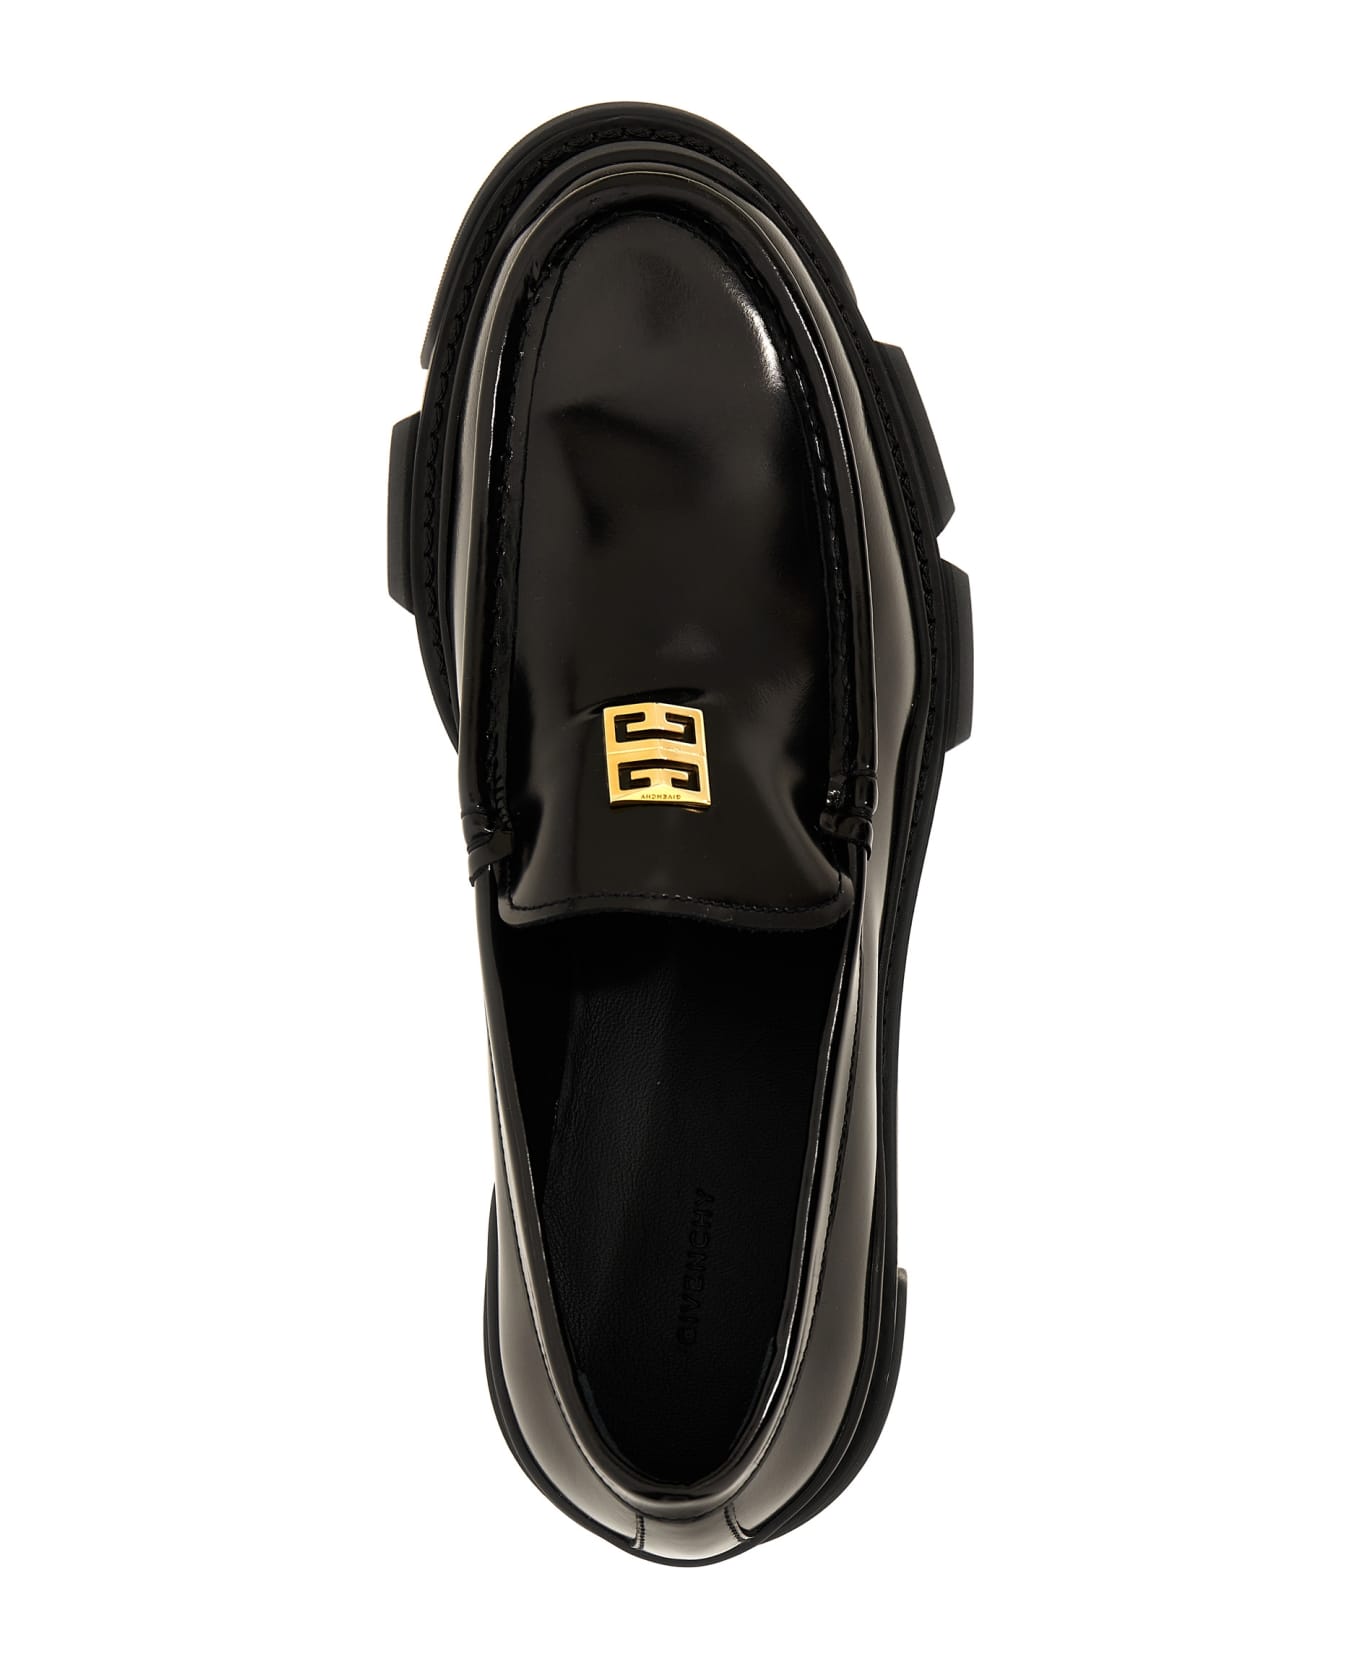 Givenchy 'terra' Loafers - Black  